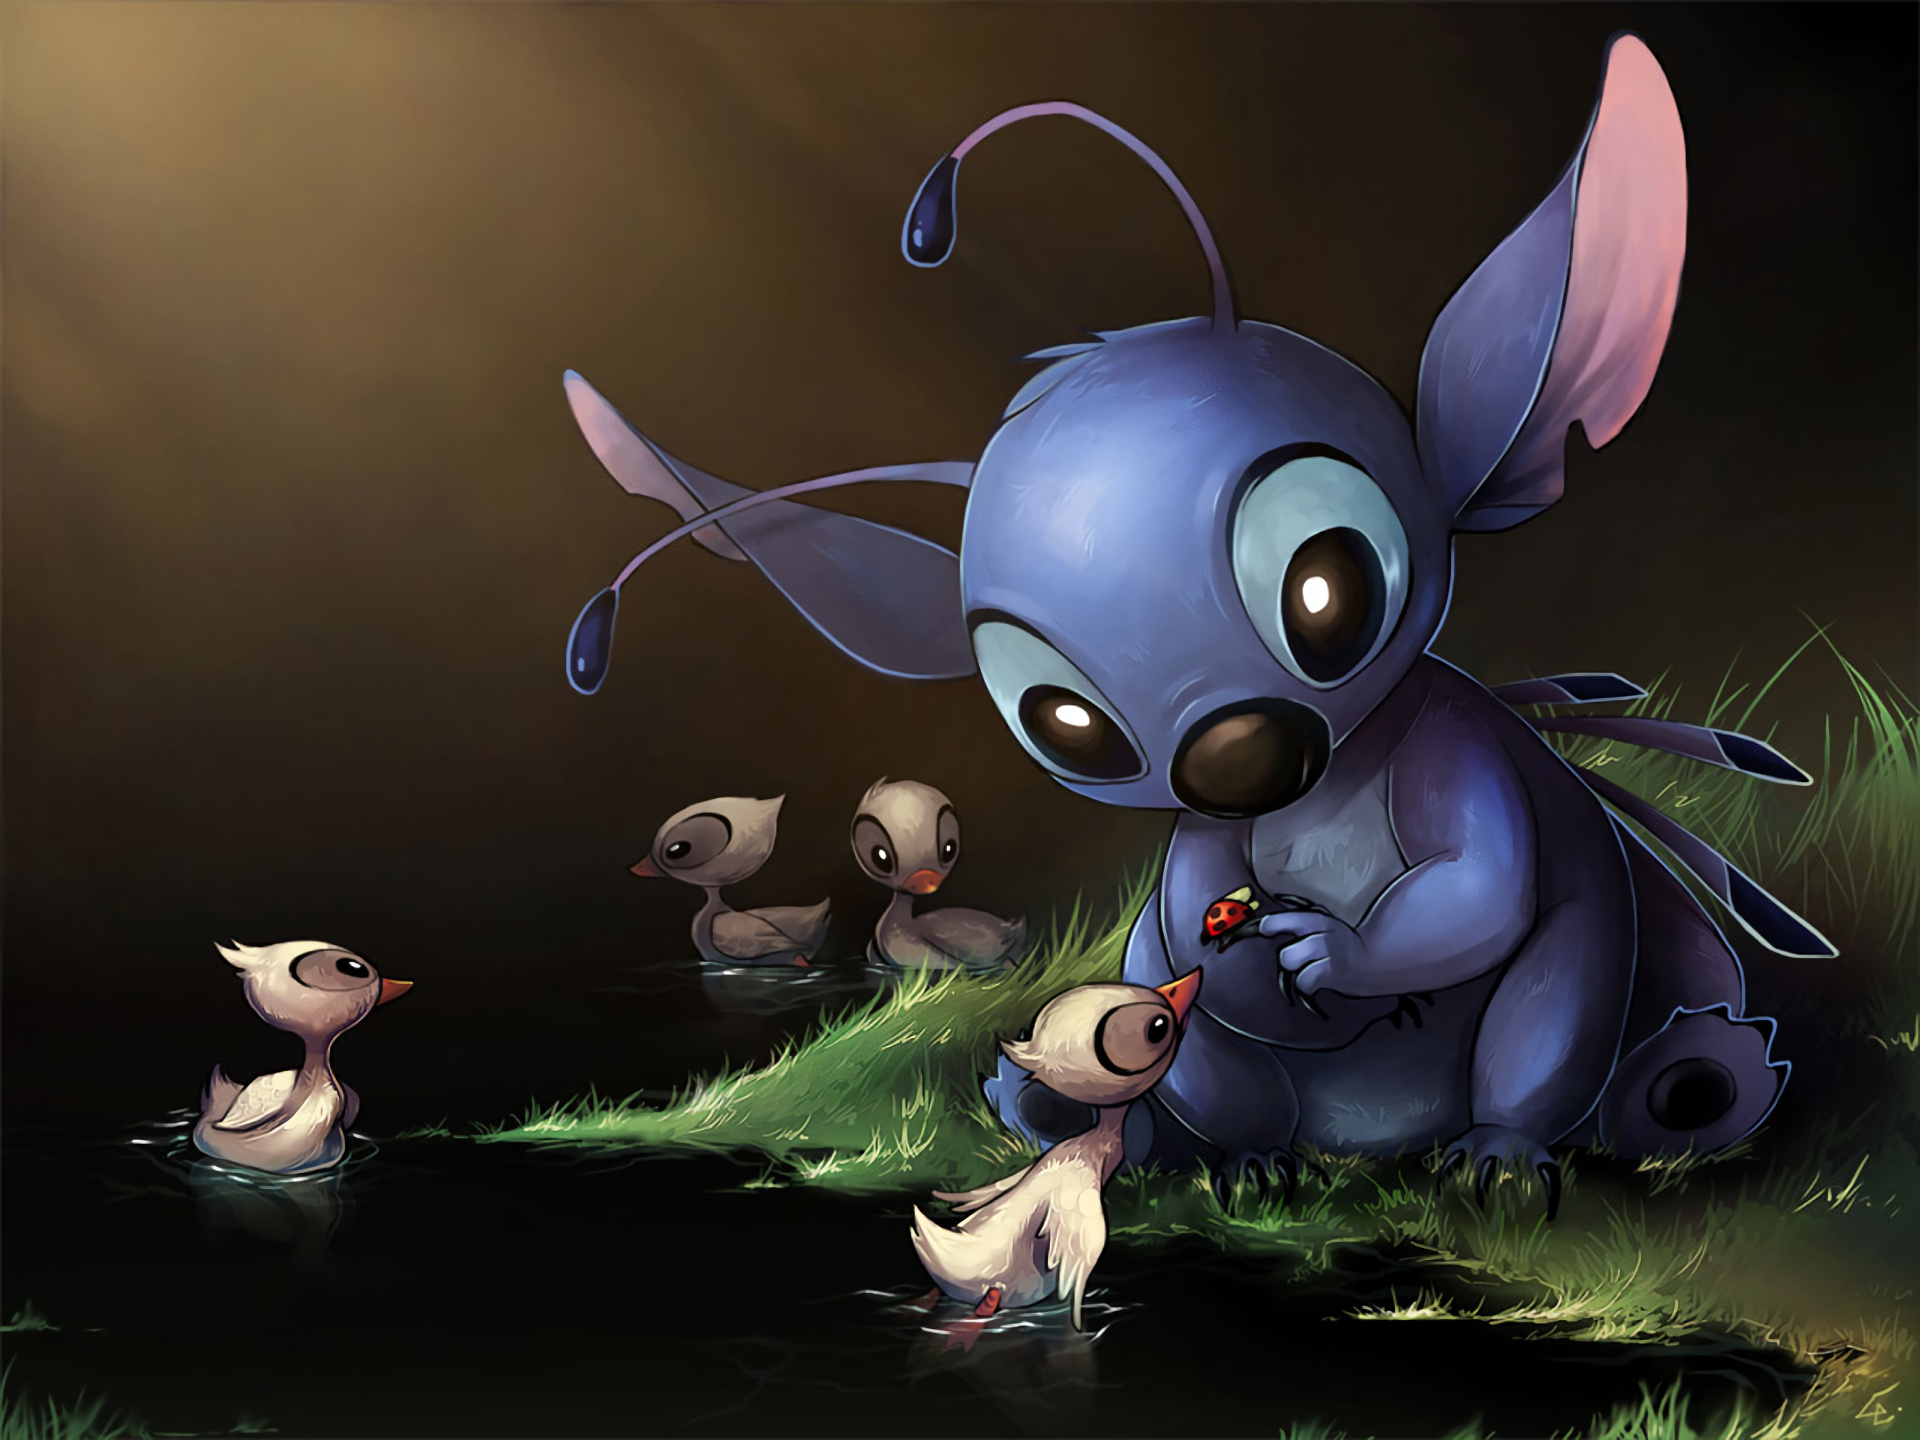 Stitch animation, Lilo & Stitch wallpapers, HD wallpapers, Popular backgrounds, 1920x1440 HD Desktop